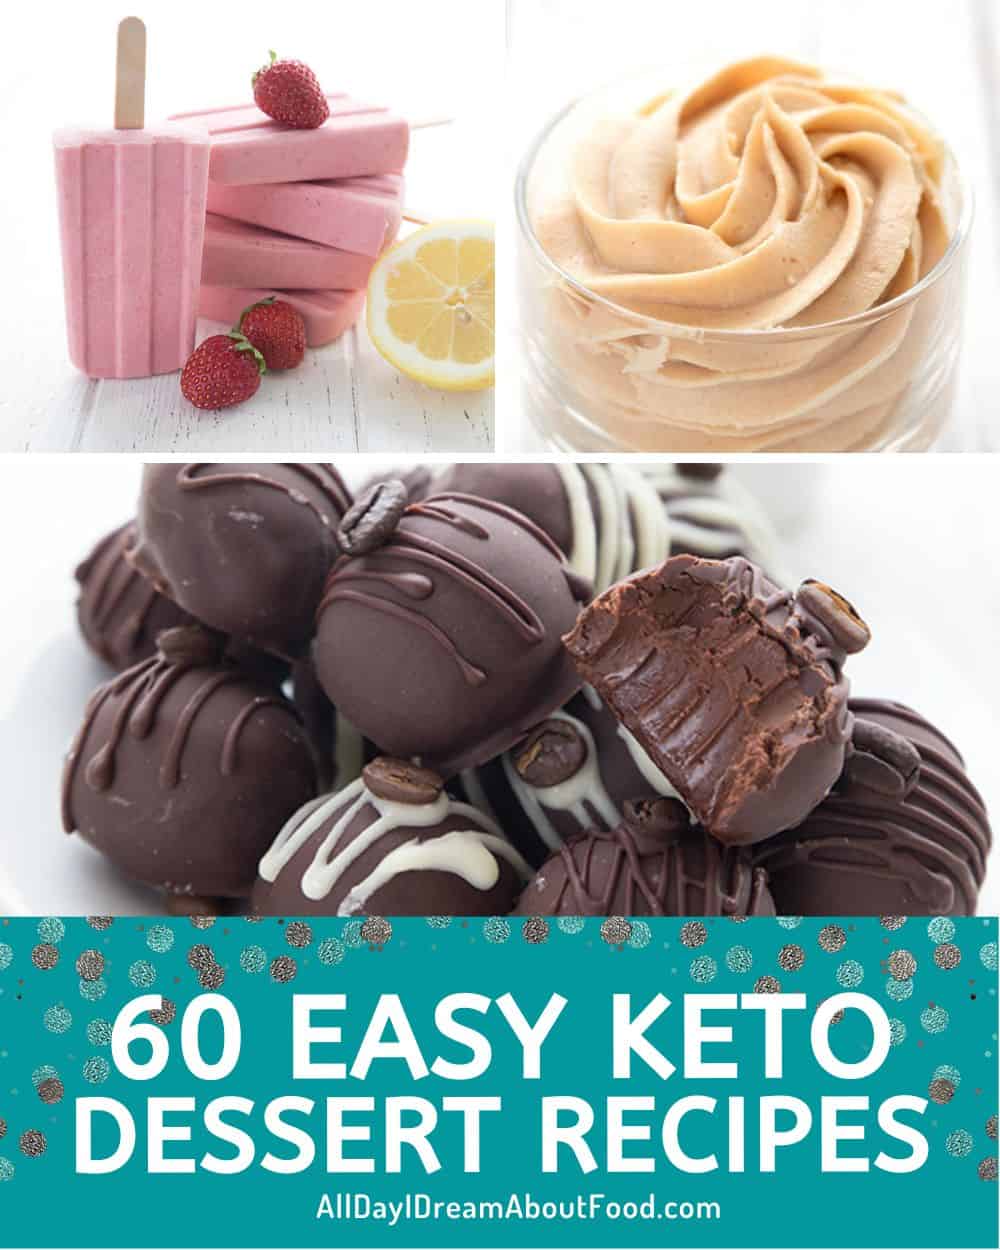 A collage of 3 easy keto dessert recipes with the title at the bottom.